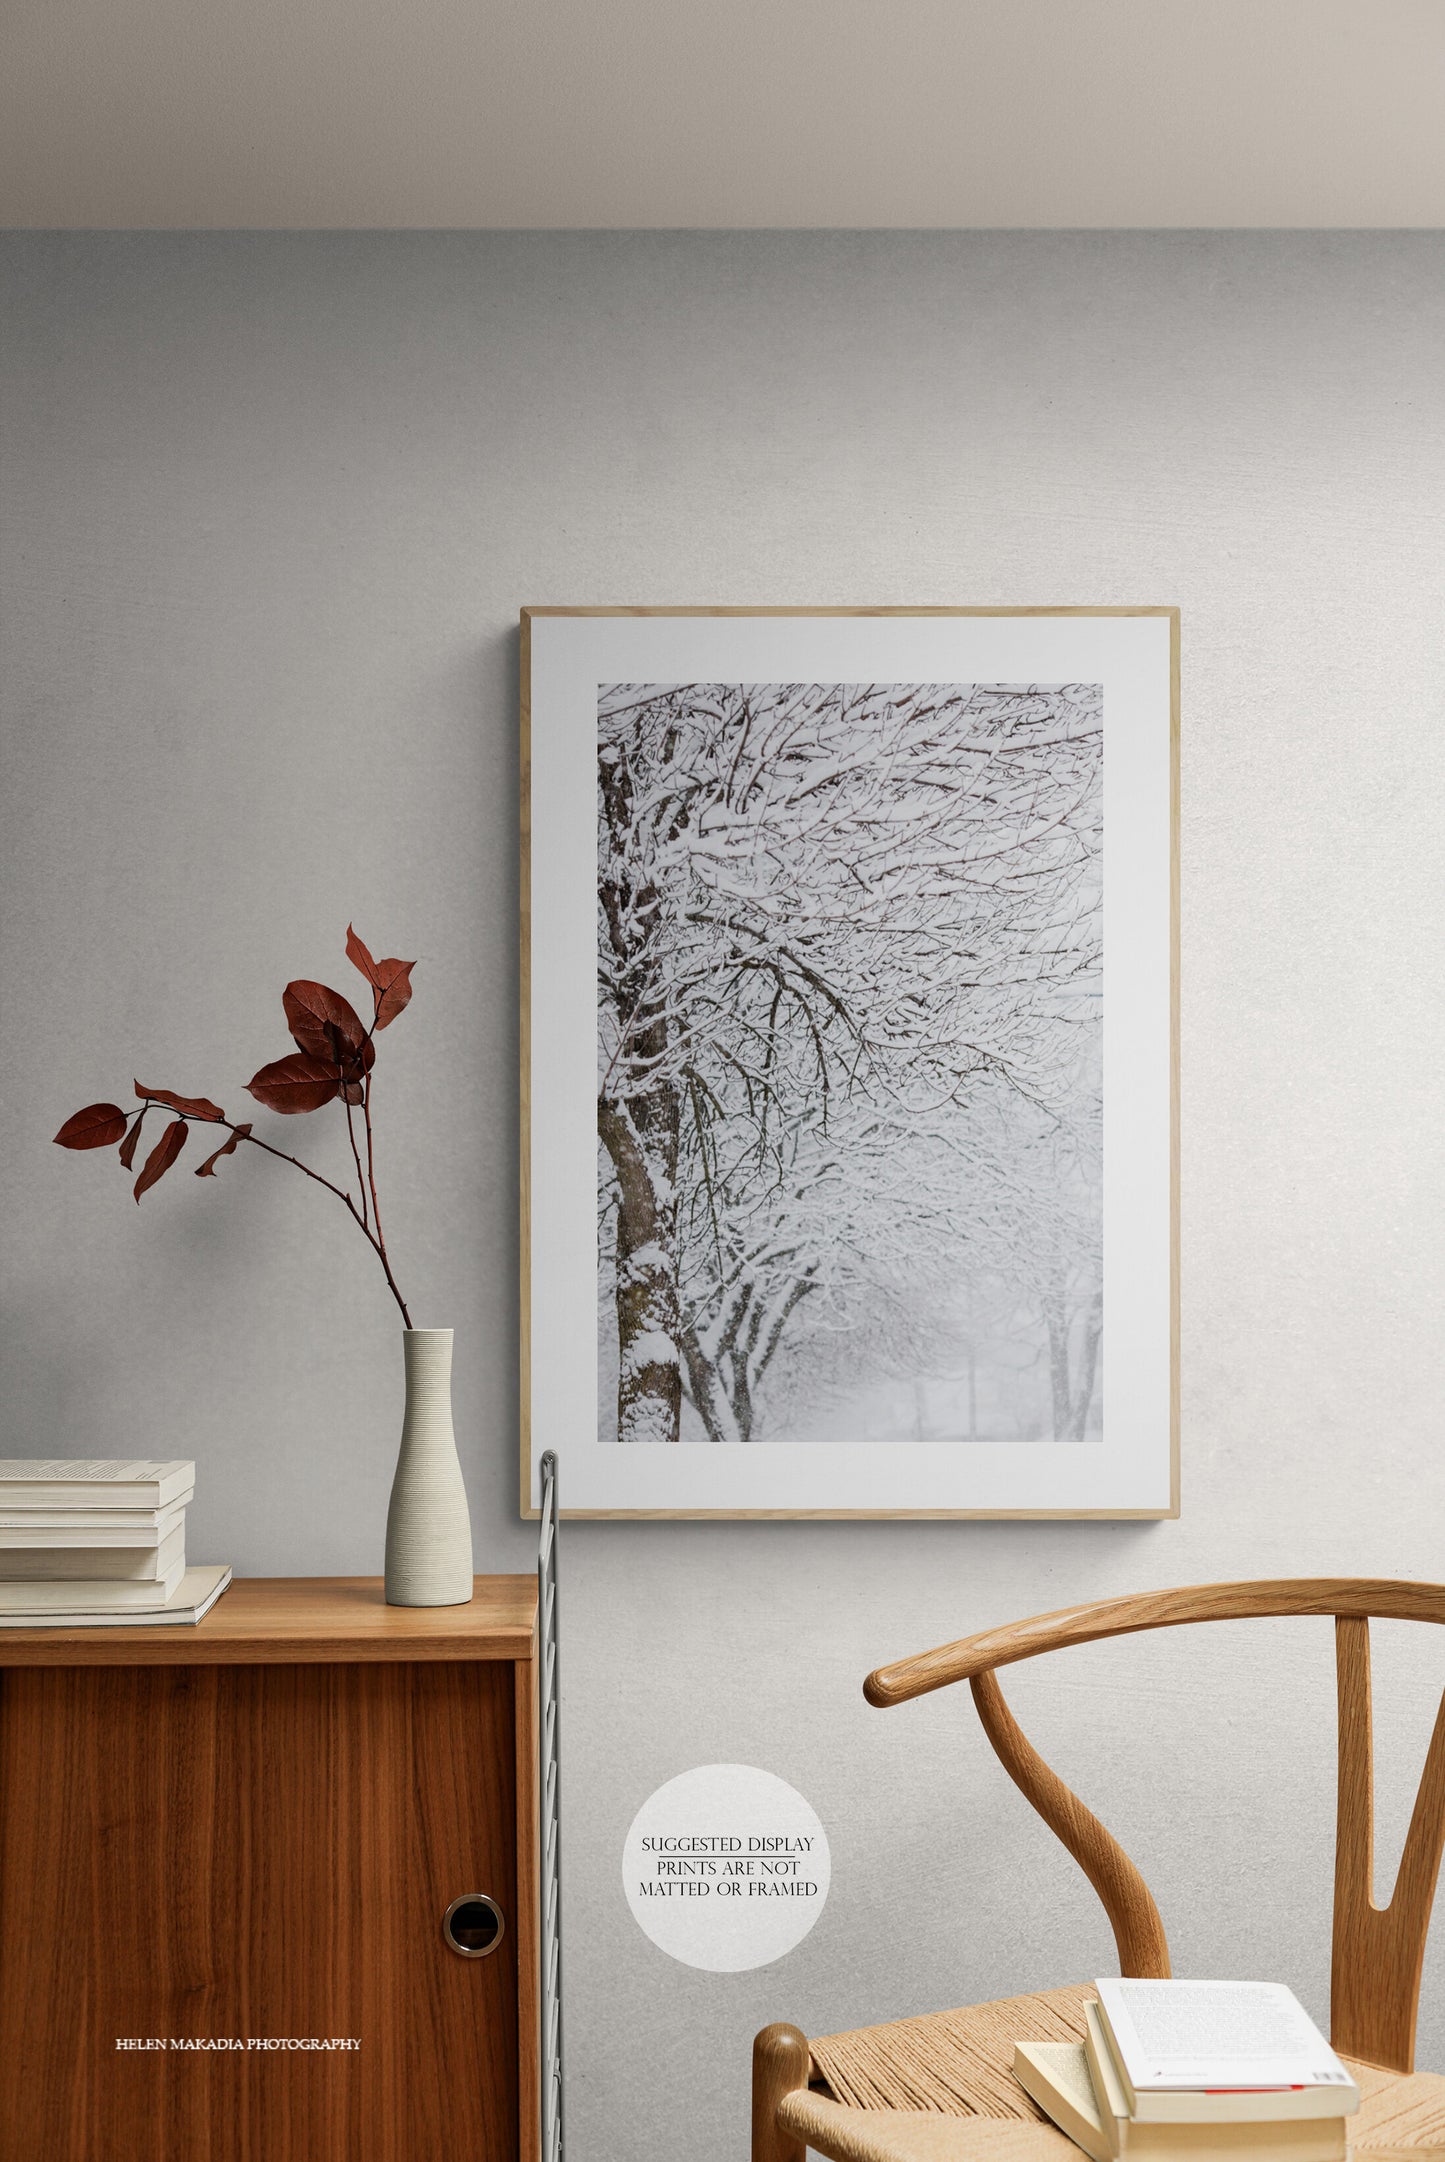 Framed Photograph of Snowy Winter Snow Storm Day in an Entryway